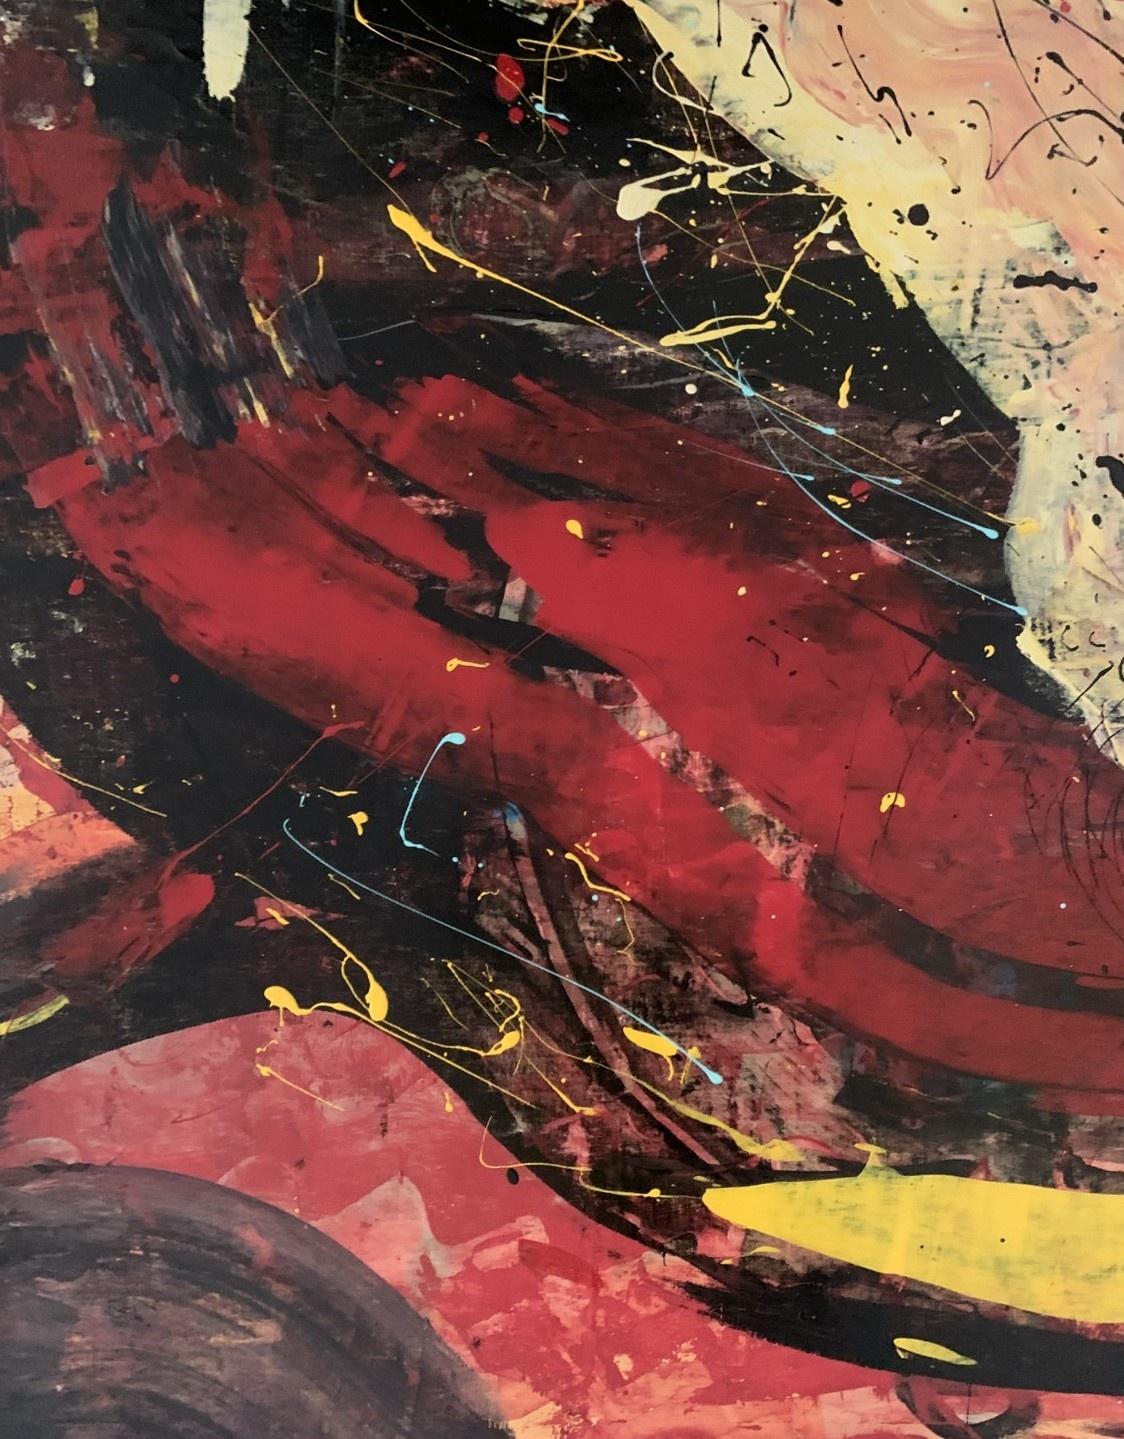 Abstract painting by Polish artist living in USA Monika Rossa. Painting in style of gestural abstraction with dynamic brush strokes and shapes. Main color is red balanced by yellow and black as well as blue accents. Do to the composition, the